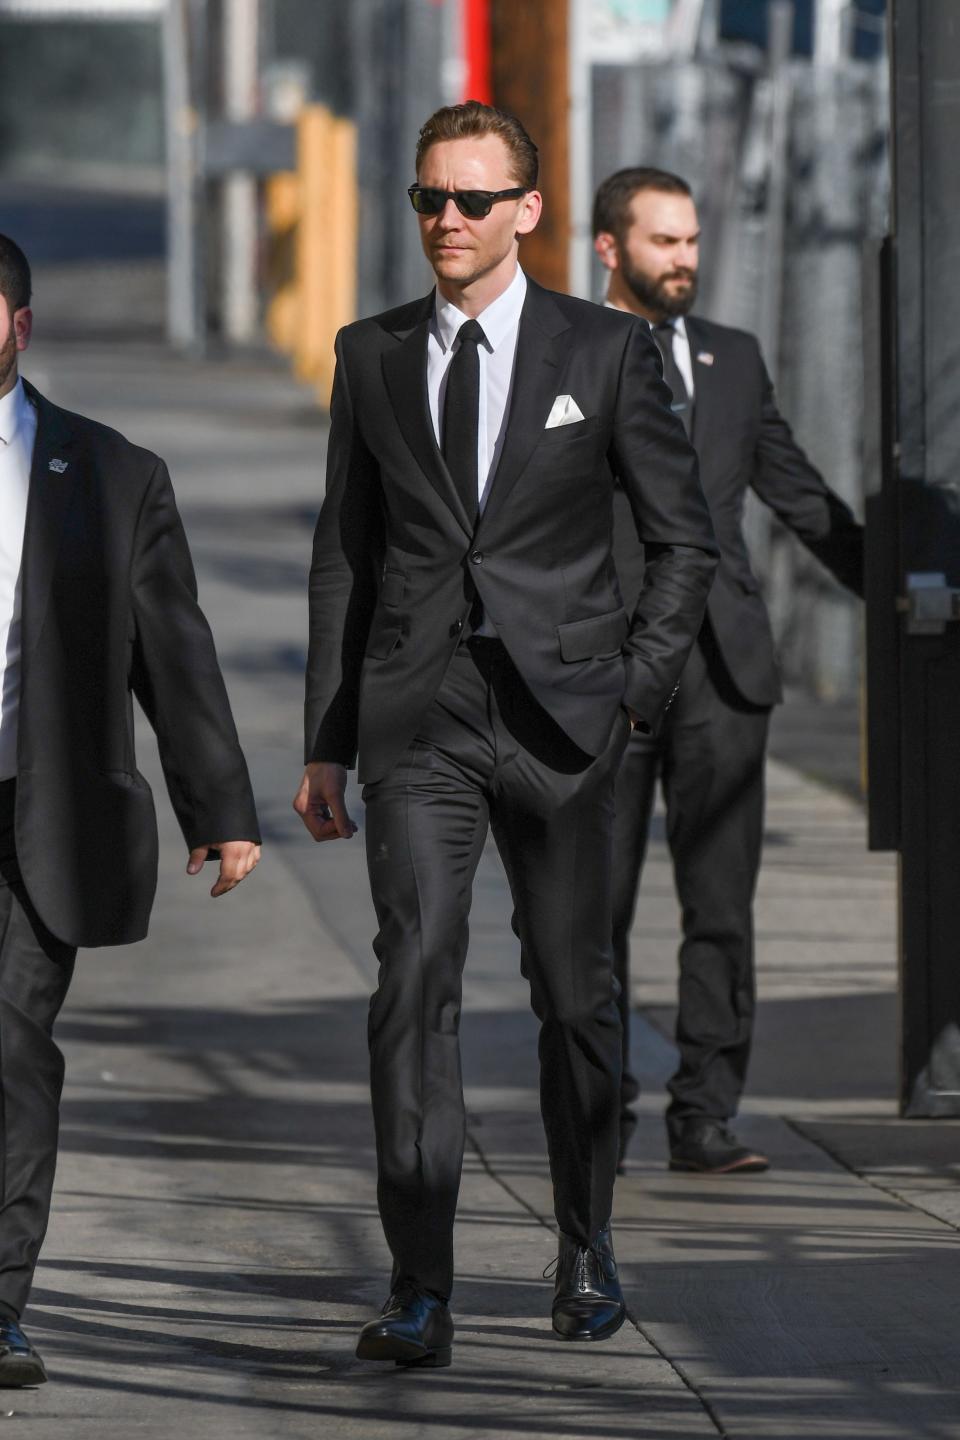 <p>Tom Hiddleston is a man who can do both but, let’s be real, dressing up is his true strength. He can wear a <a rel="nofollow noopener" href="http://www.gq.com/gallery/tom-hiddleston-style-look-book-suits?mbid=synd_yahoostyle#2" target="_blank" data-ylk="slk:cranberry double-breasted suit;elm:context_link;itc:0;sec:content-canvas" class="link ">cranberry double-breasted suit</a> or a <a rel="nofollow noopener" href="http://www.gq.com/story/tom-hiddleston-gucci-suit-kong-red-carpet?mbid=synd_yahoostyle" target="_blank" data-ylk="slk:sober navy two-button style;elm:context_link;itc:0;sec:content-canvas" class="link ">sober navy two-button style</a> or some <a rel="nofollow noopener" href="http://www.gq.com/gallery/tom-hiddleston-style-look-book-suits?mbid=synd_yahoostyle#7" target="_blank" data-ylk="slk:ye-ole-English three-piece kit;elm:context_link;itc:0;sec:content-canvas" class="link ">ye-ole-English three-piece kit</a> with equal charm. He can wear <a rel="nofollow noopener" href="http://www.gq.com/story/tom-hiddleston-aquatalia-boots?mbid=synd_yahoostyle" target="_blank" data-ylk="slk:flat-front chinos;elm:context_link;itc:0;sec:content-canvas" class="link ">flat-front chinos</a>, and <a rel="nofollow noopener" href="http://www.gq.com/gallery/tom-hiddleston-style-look-book-suits?mbid=synd_yahoostyle#11" target="_blank" data-ylk="slk:notch-lapel blazers;elm:context_link;itc:0;sec:content-canvas" class="link ">notch-lapel blazers</a>, and <a rel="nofollow noopener" href="http://www.gq.com/story/tom-hiddleston-dress-shirt-pink?mbid=synd_yahoostyle" target="_blank" data-ylk="slk:weird-color button-down shirts;elm:context_link;itc:0;sec:content-canvas" class="link ">weird-color button-down shirts</a>. Basically, if it’s respectable enough to wear in an office, he’s done it and he’s knocked it out of the park. Cementing his status as an office style hero was this Gucci look, which Hiddleston wore on <em>Jimmy Kimmel Live</em> yesterday. Just when you thought the man had dressed up in every possible way, he goes all <em>Reservoir Dogs</em> on us; walking in slow-motion in some back alley while wearing a slim black suit and Ray-Bans.</p><p>If you are an accountant, or an agent, or an assistant of an accountant or an agent, let this look be your work wardrobe inspiration. If you are in another field, well, rest assured there’s a Hiddleston look for you.</p>